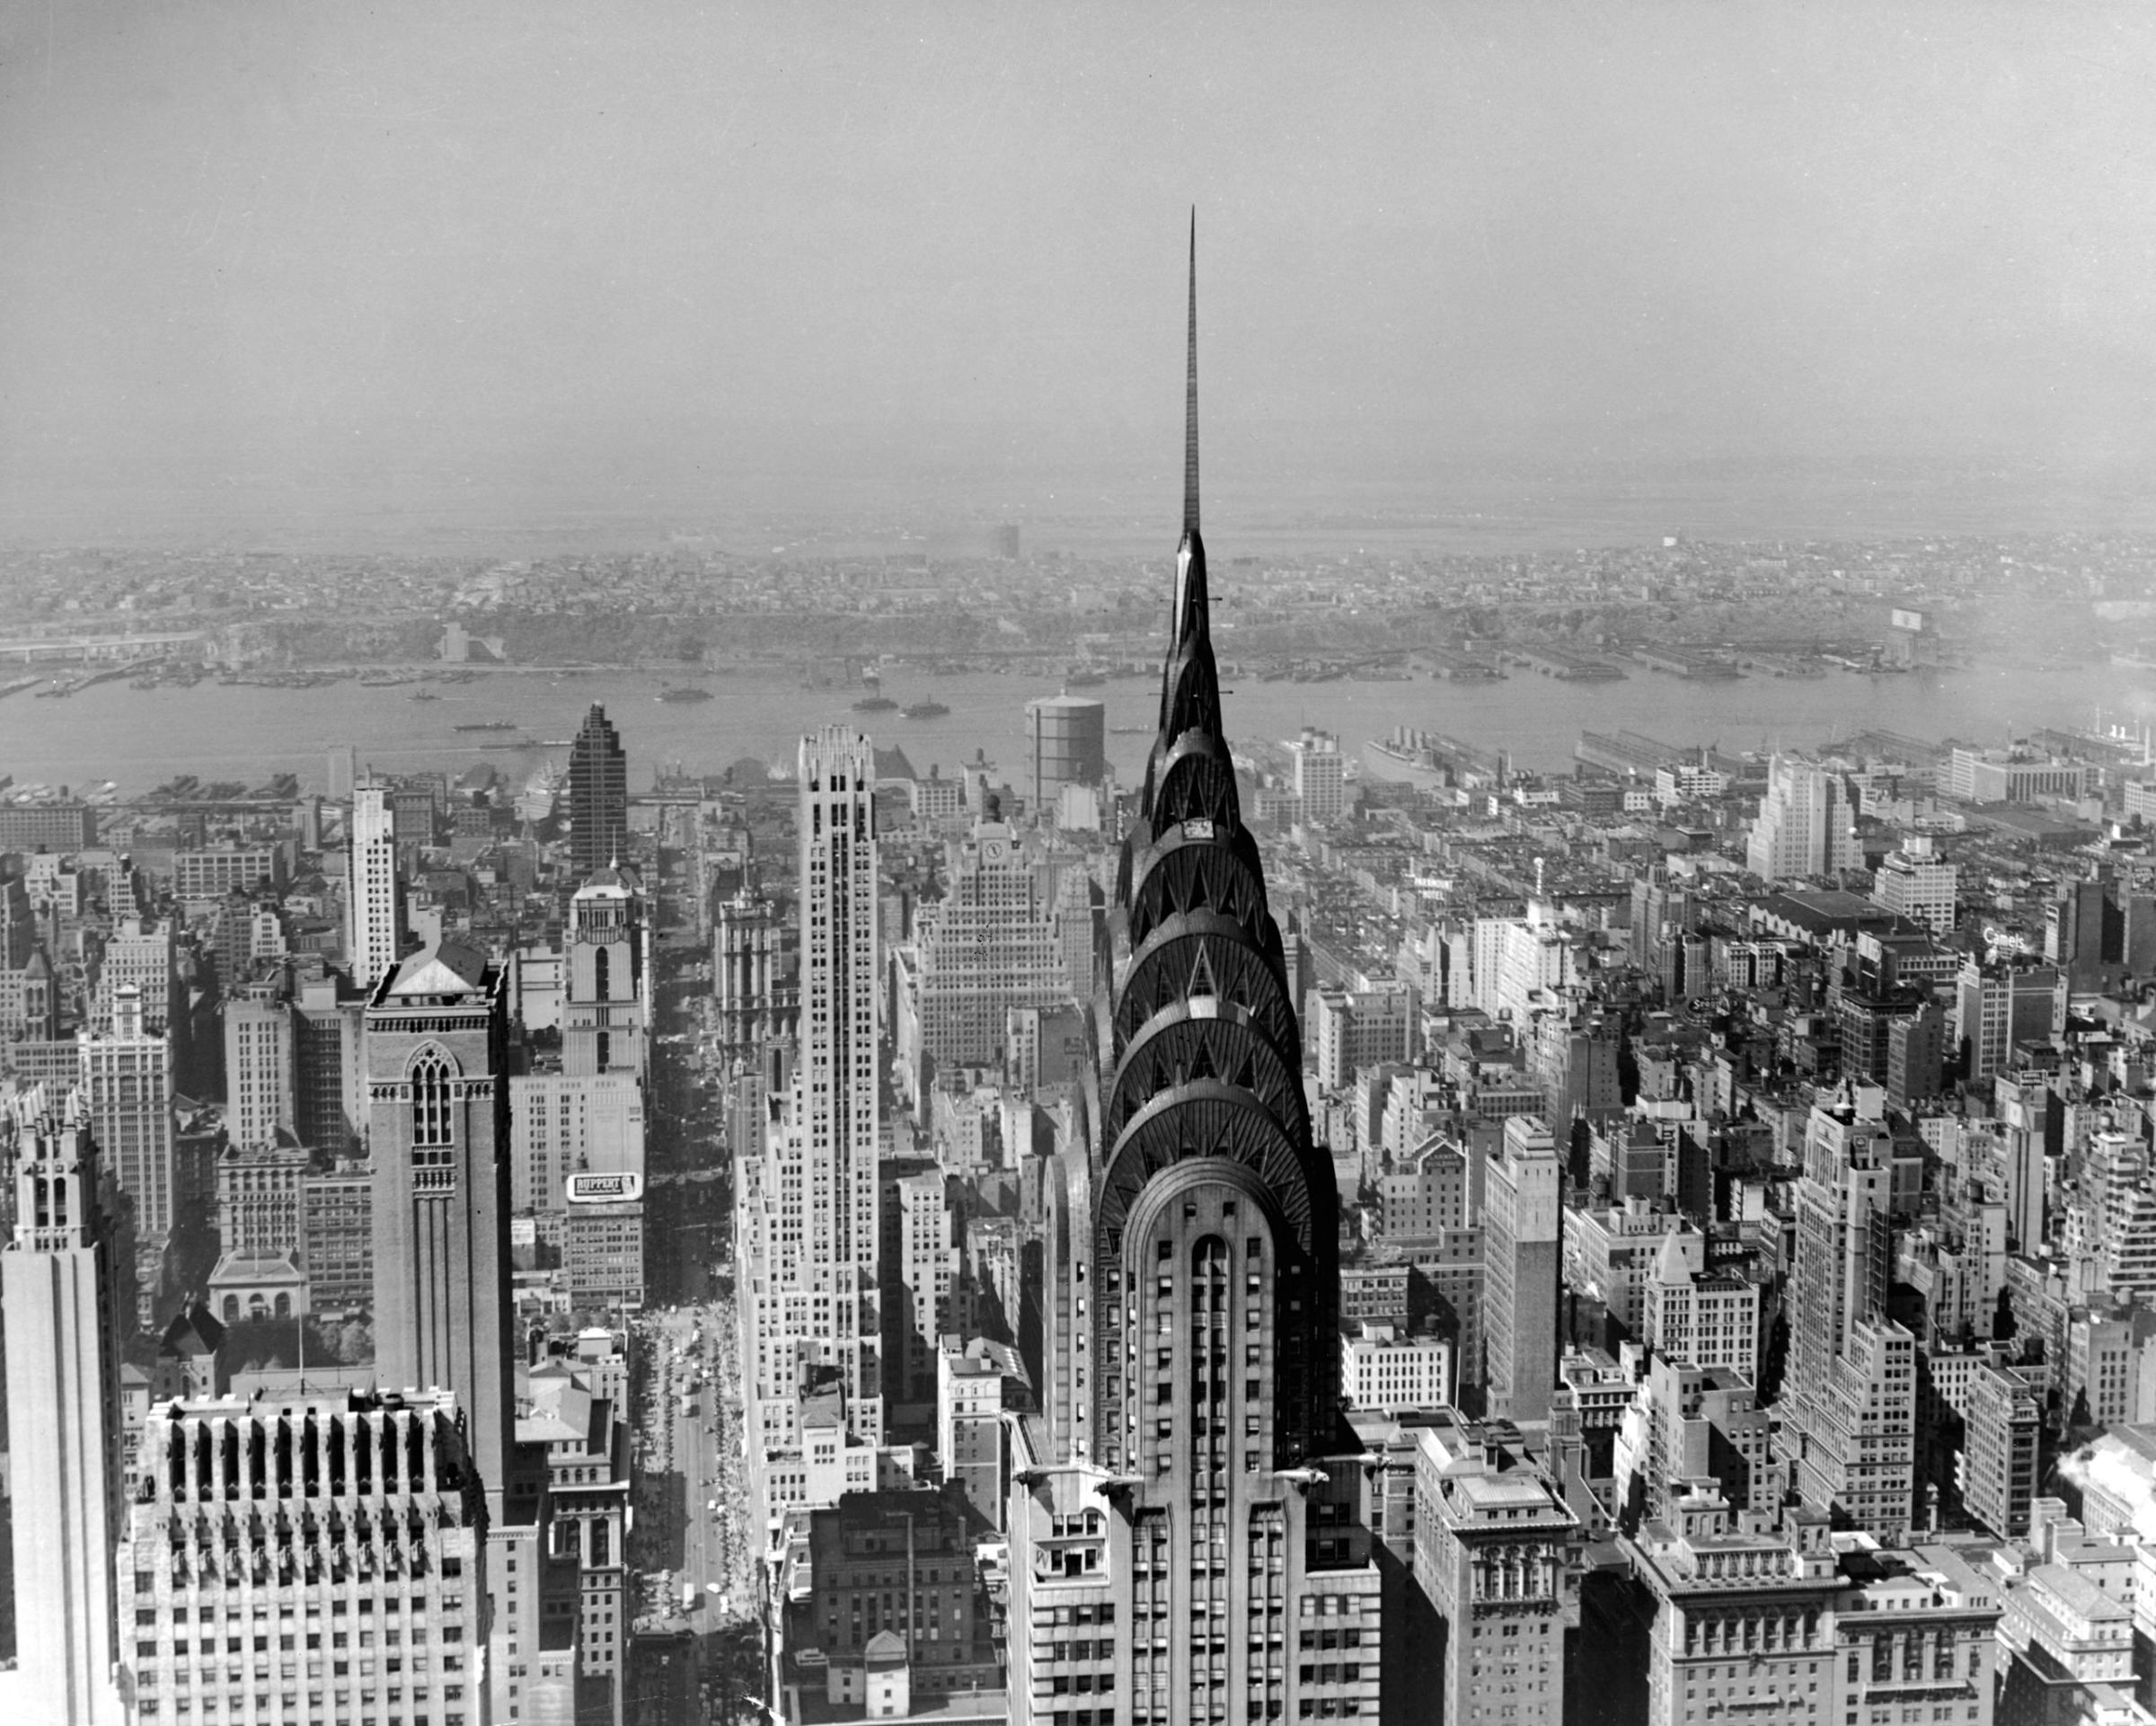 View of Midtown Manhattan looking west along 42nd Street with the Chrysler Building, 1930.